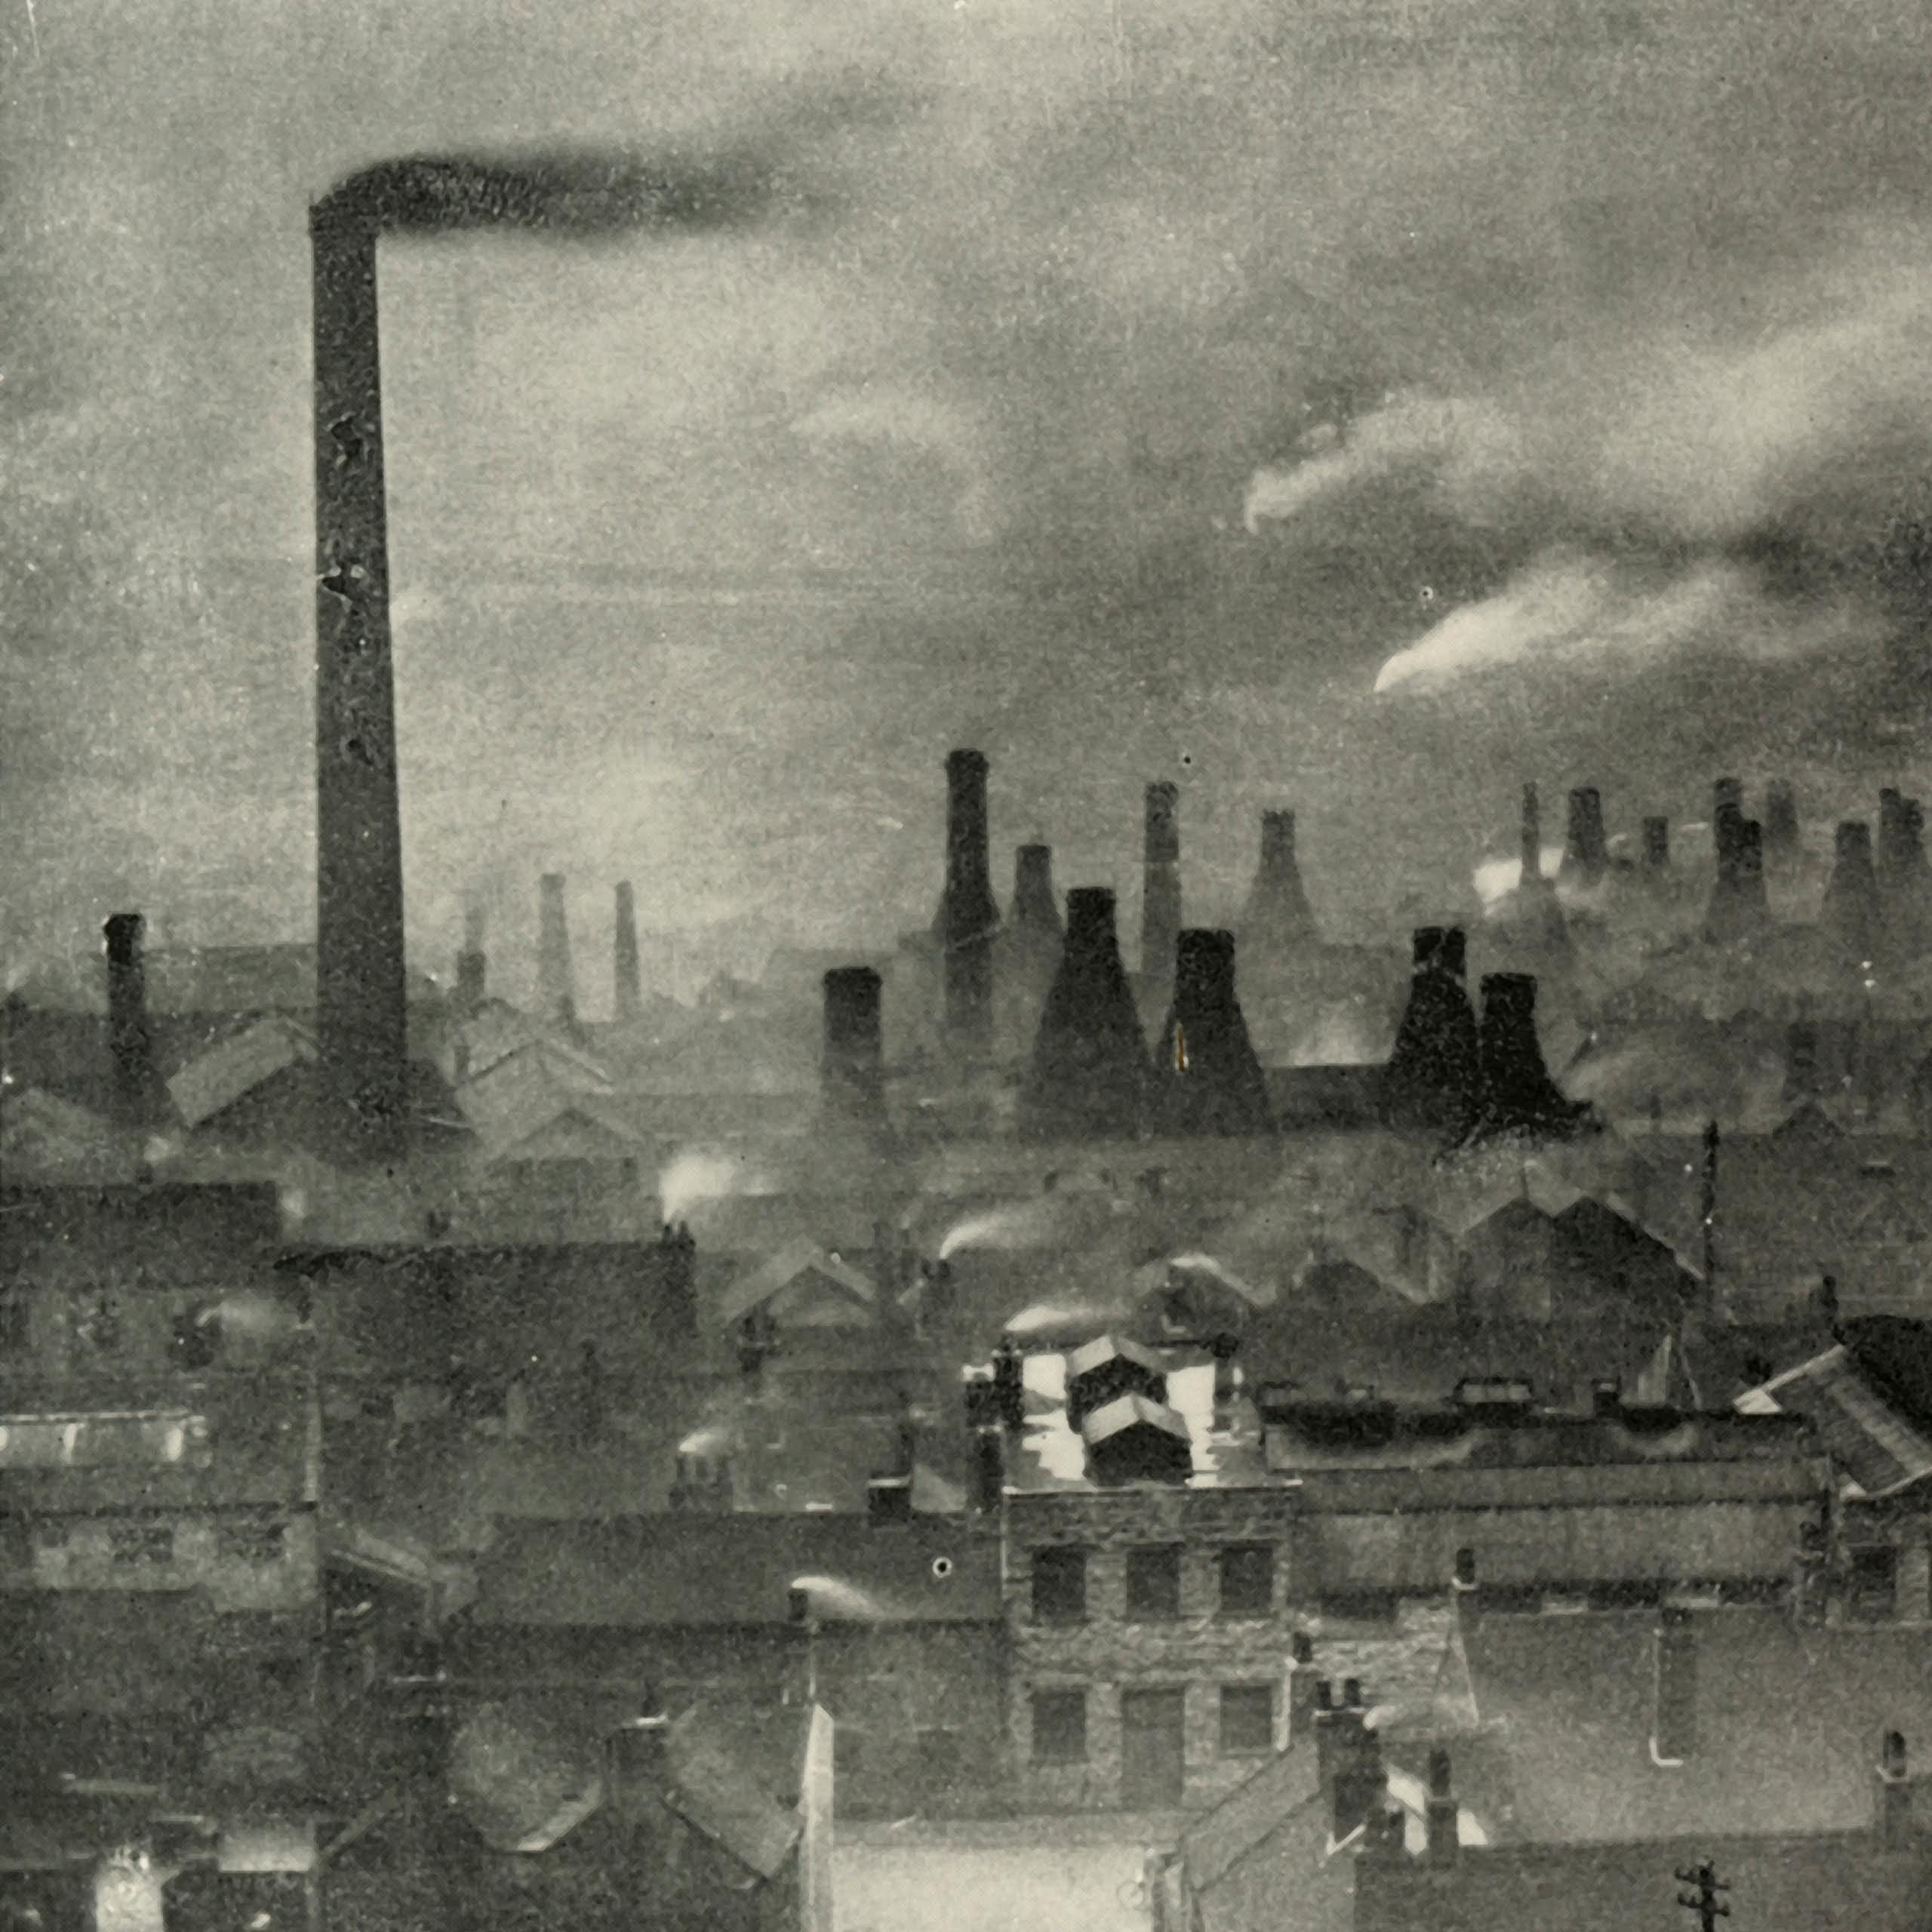 Smoke rises from many chimneys in an industrial area of England.